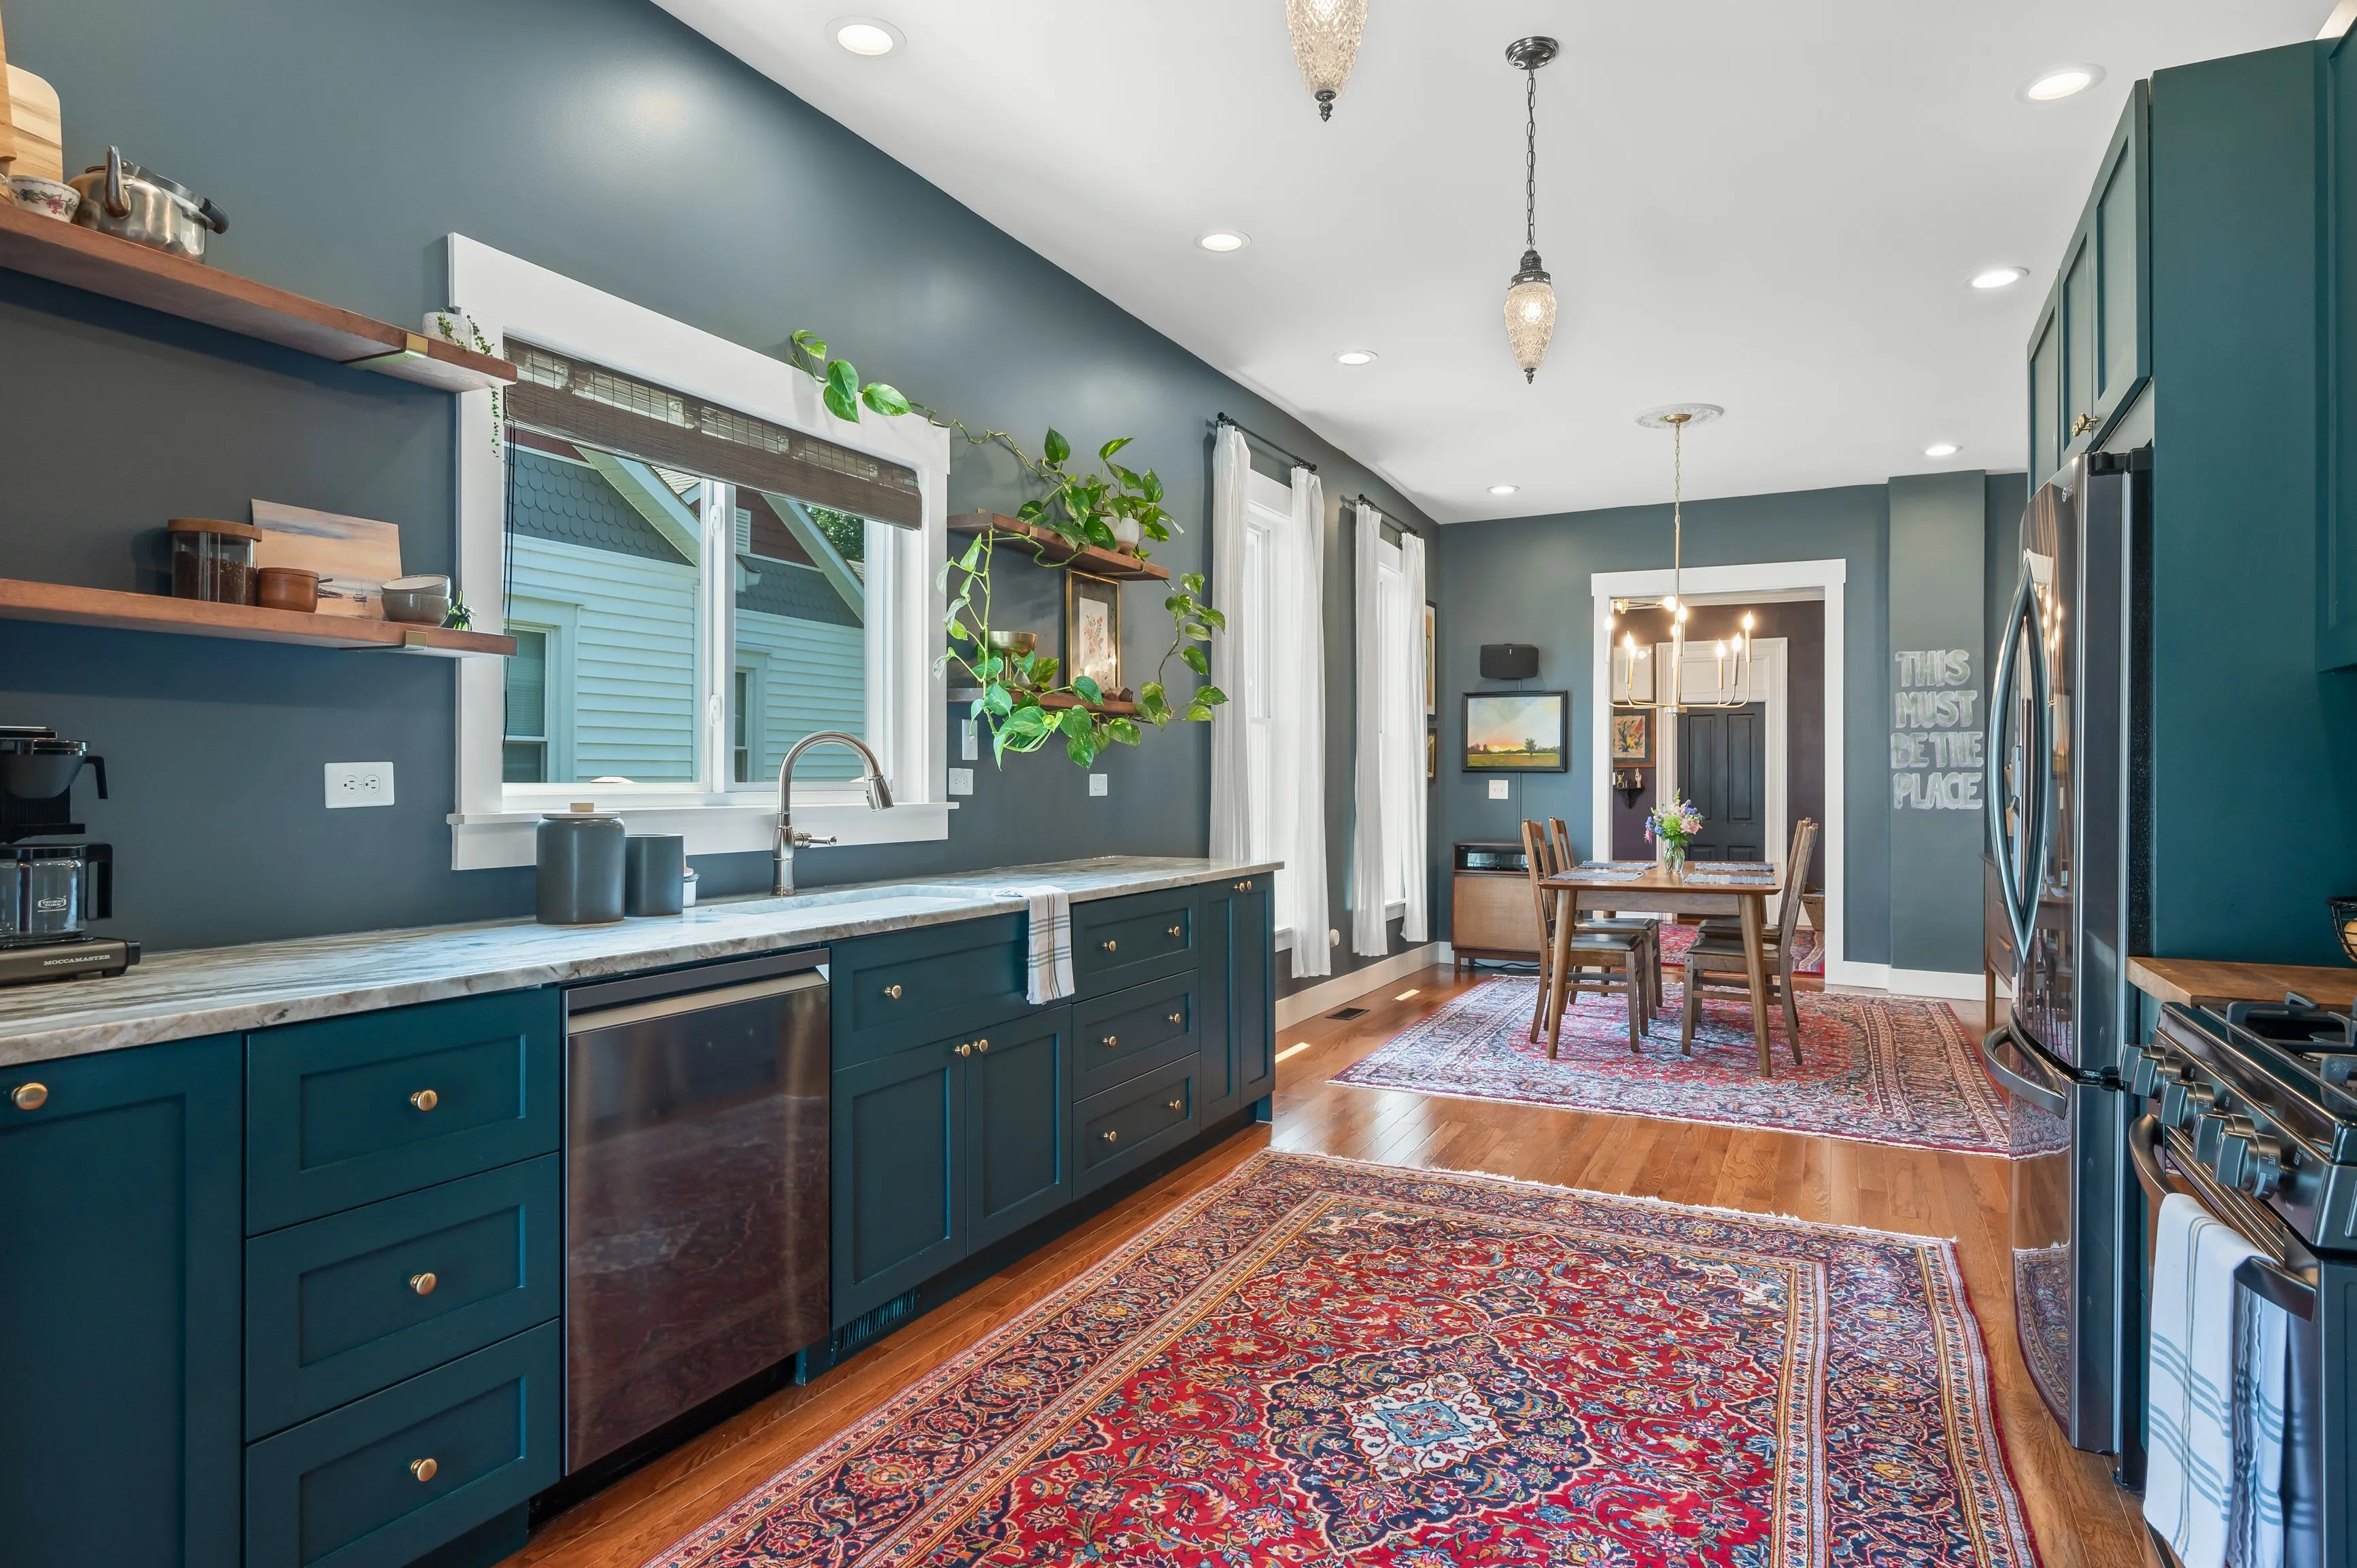 Elegant interior of a spacious kitchen with dark green cabinetry, stainless steel appliances, Persian rug on the hardwood floor, leading to a well-lit dining area.